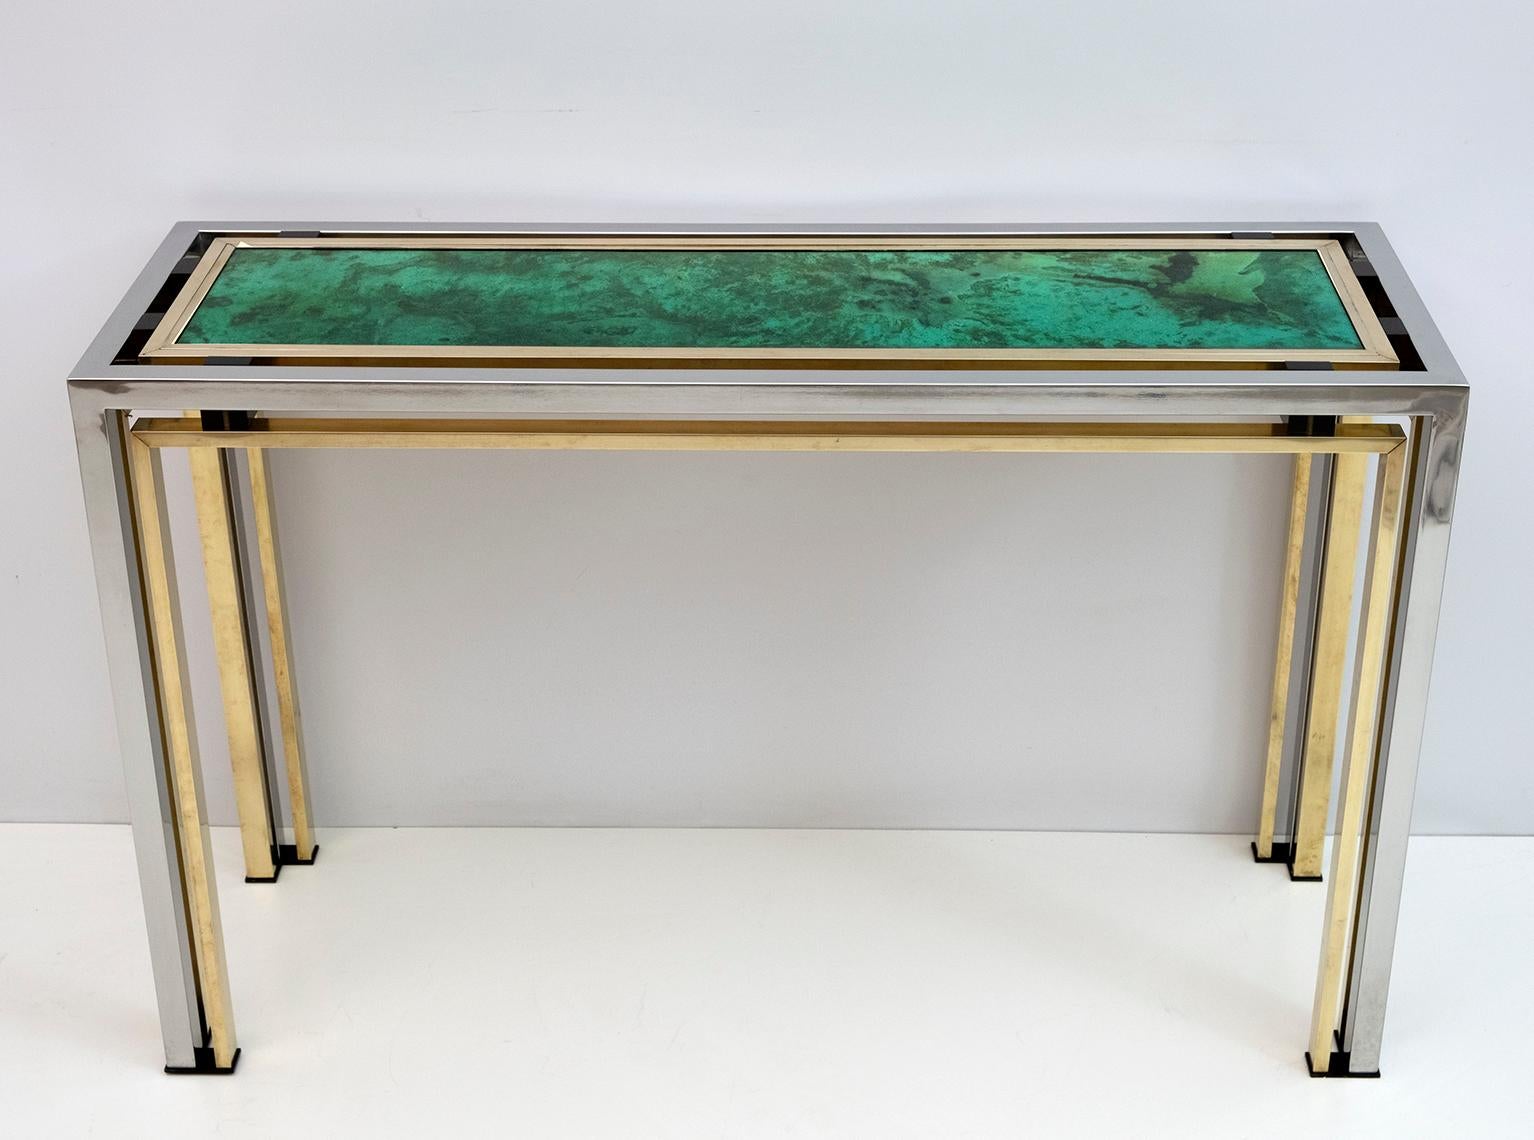 Gorgeous console in brass and chromed metal from the 70s with upper console in artistic glass and parts in bakelite, designed by Romeo Rega. The console carries the fima at the bottom, as shown in the photo. In excellent condition.